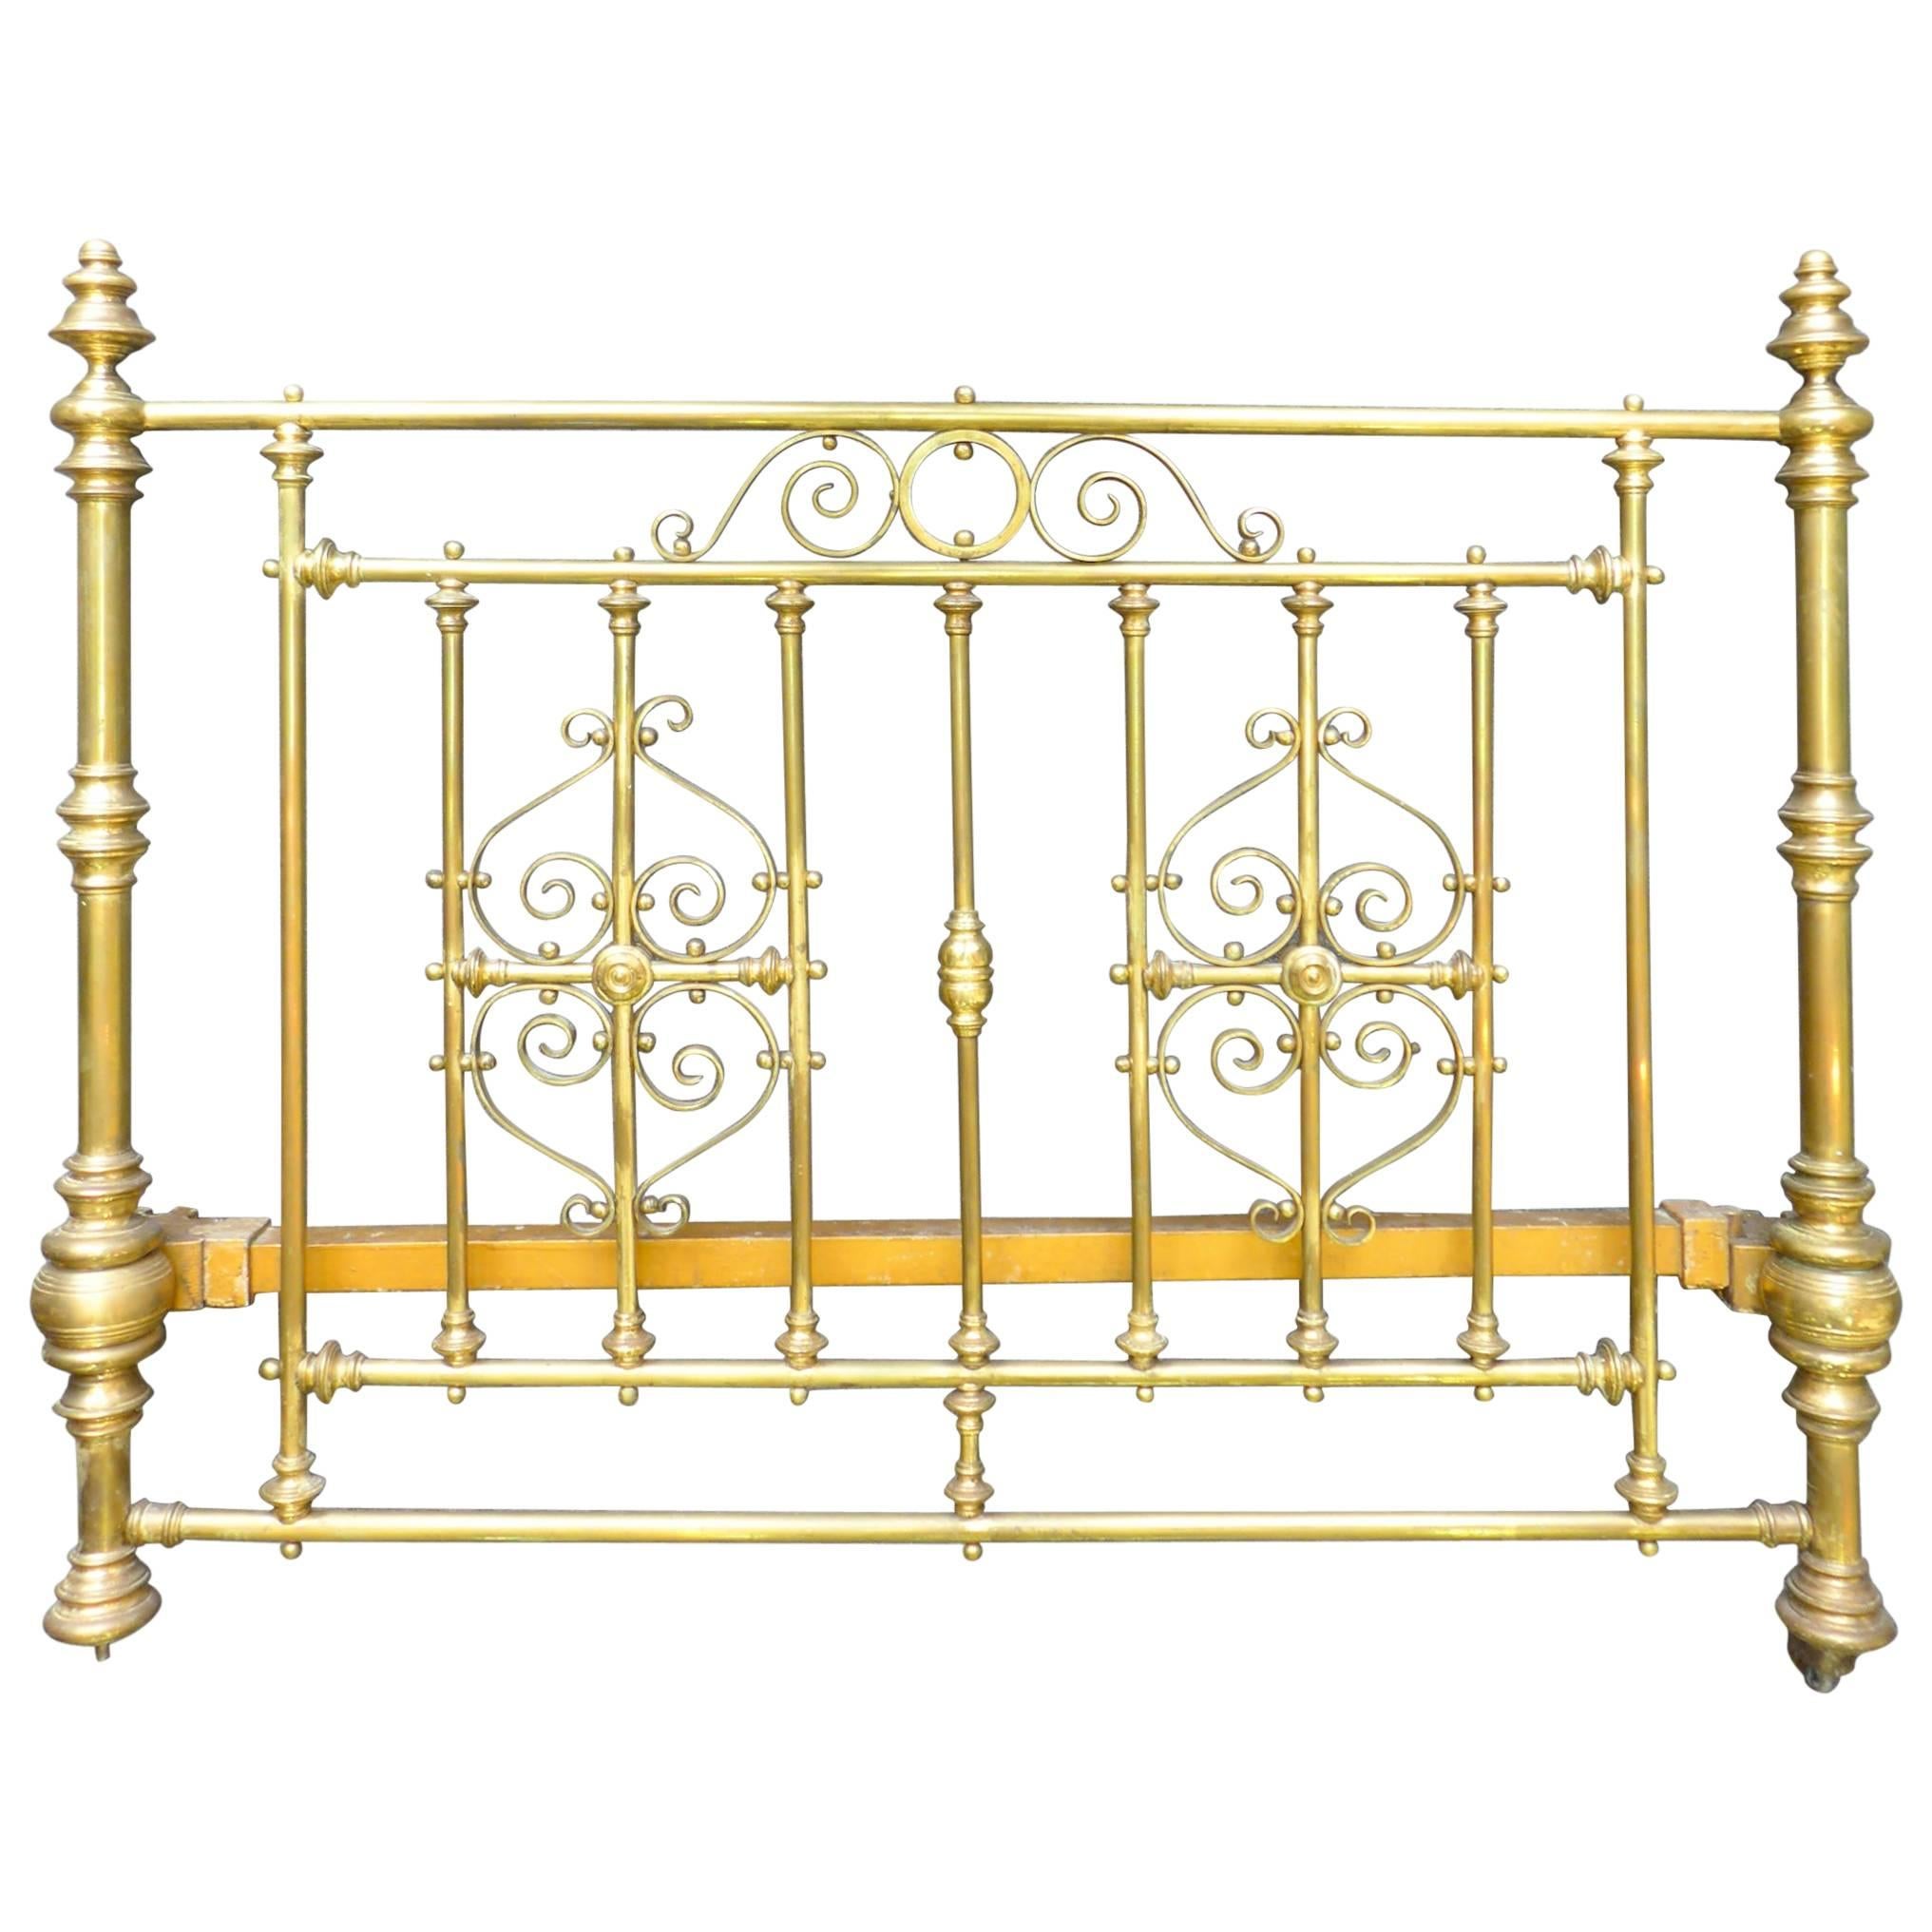 Magnificent 19th Century Brass Bedstead